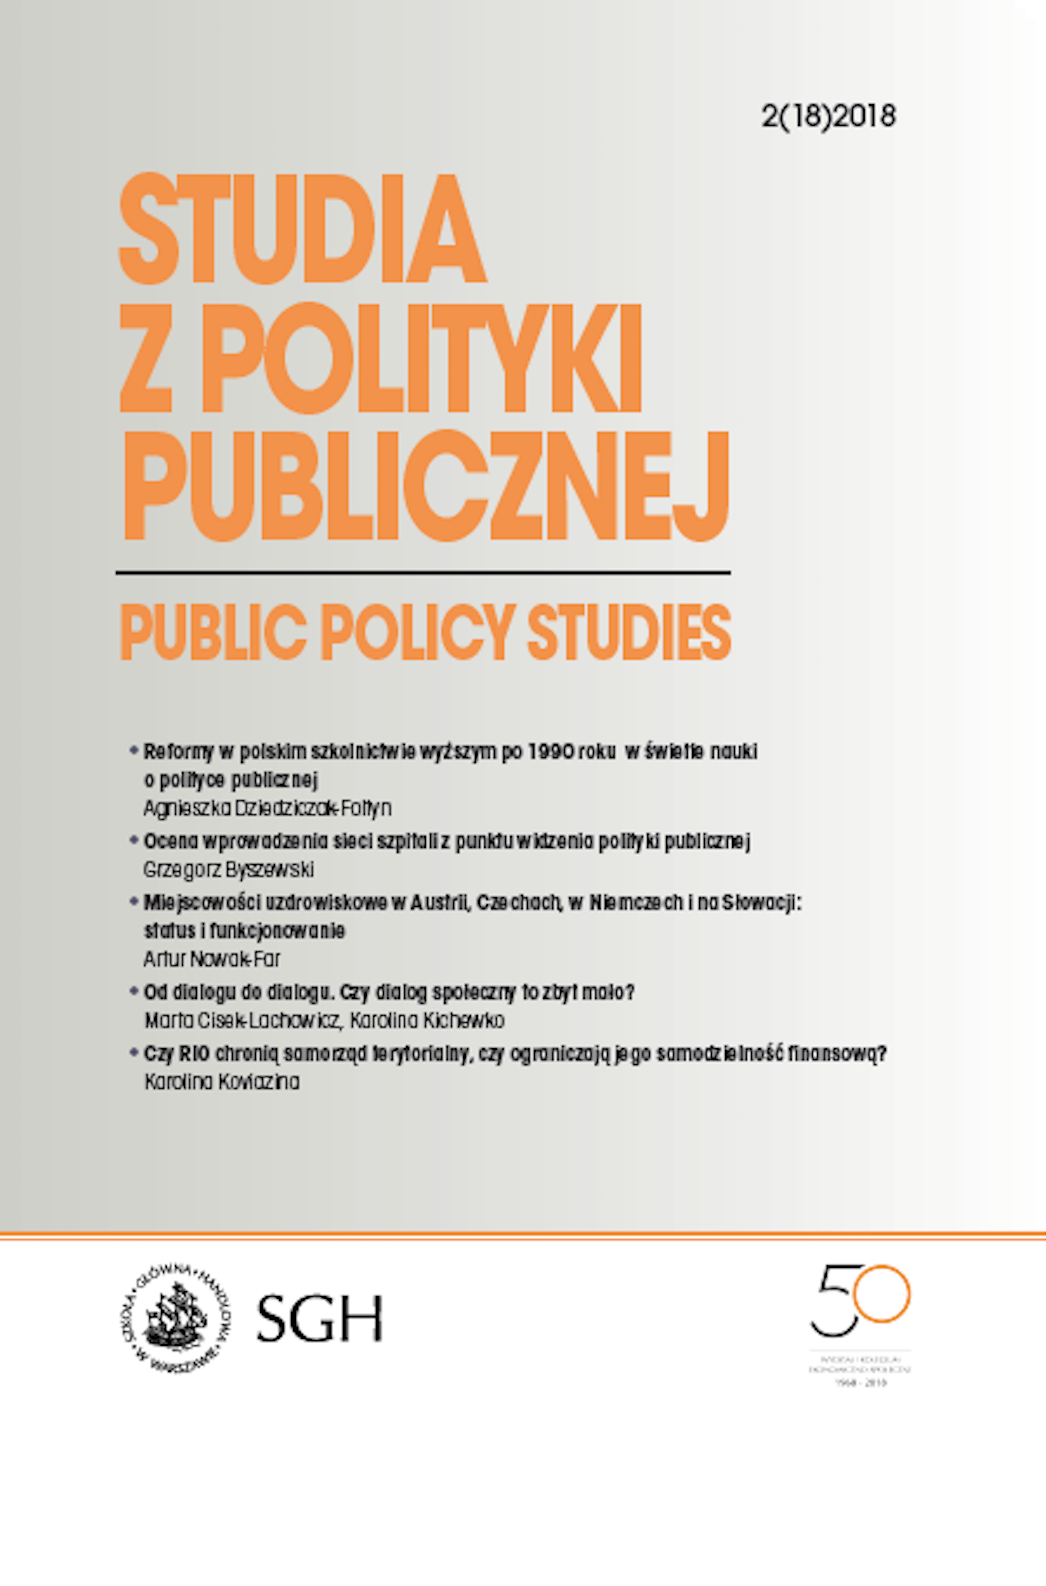 The 2014 European parliamentary election in Poland: the evaluation of the challenges to the European Union Cover Image